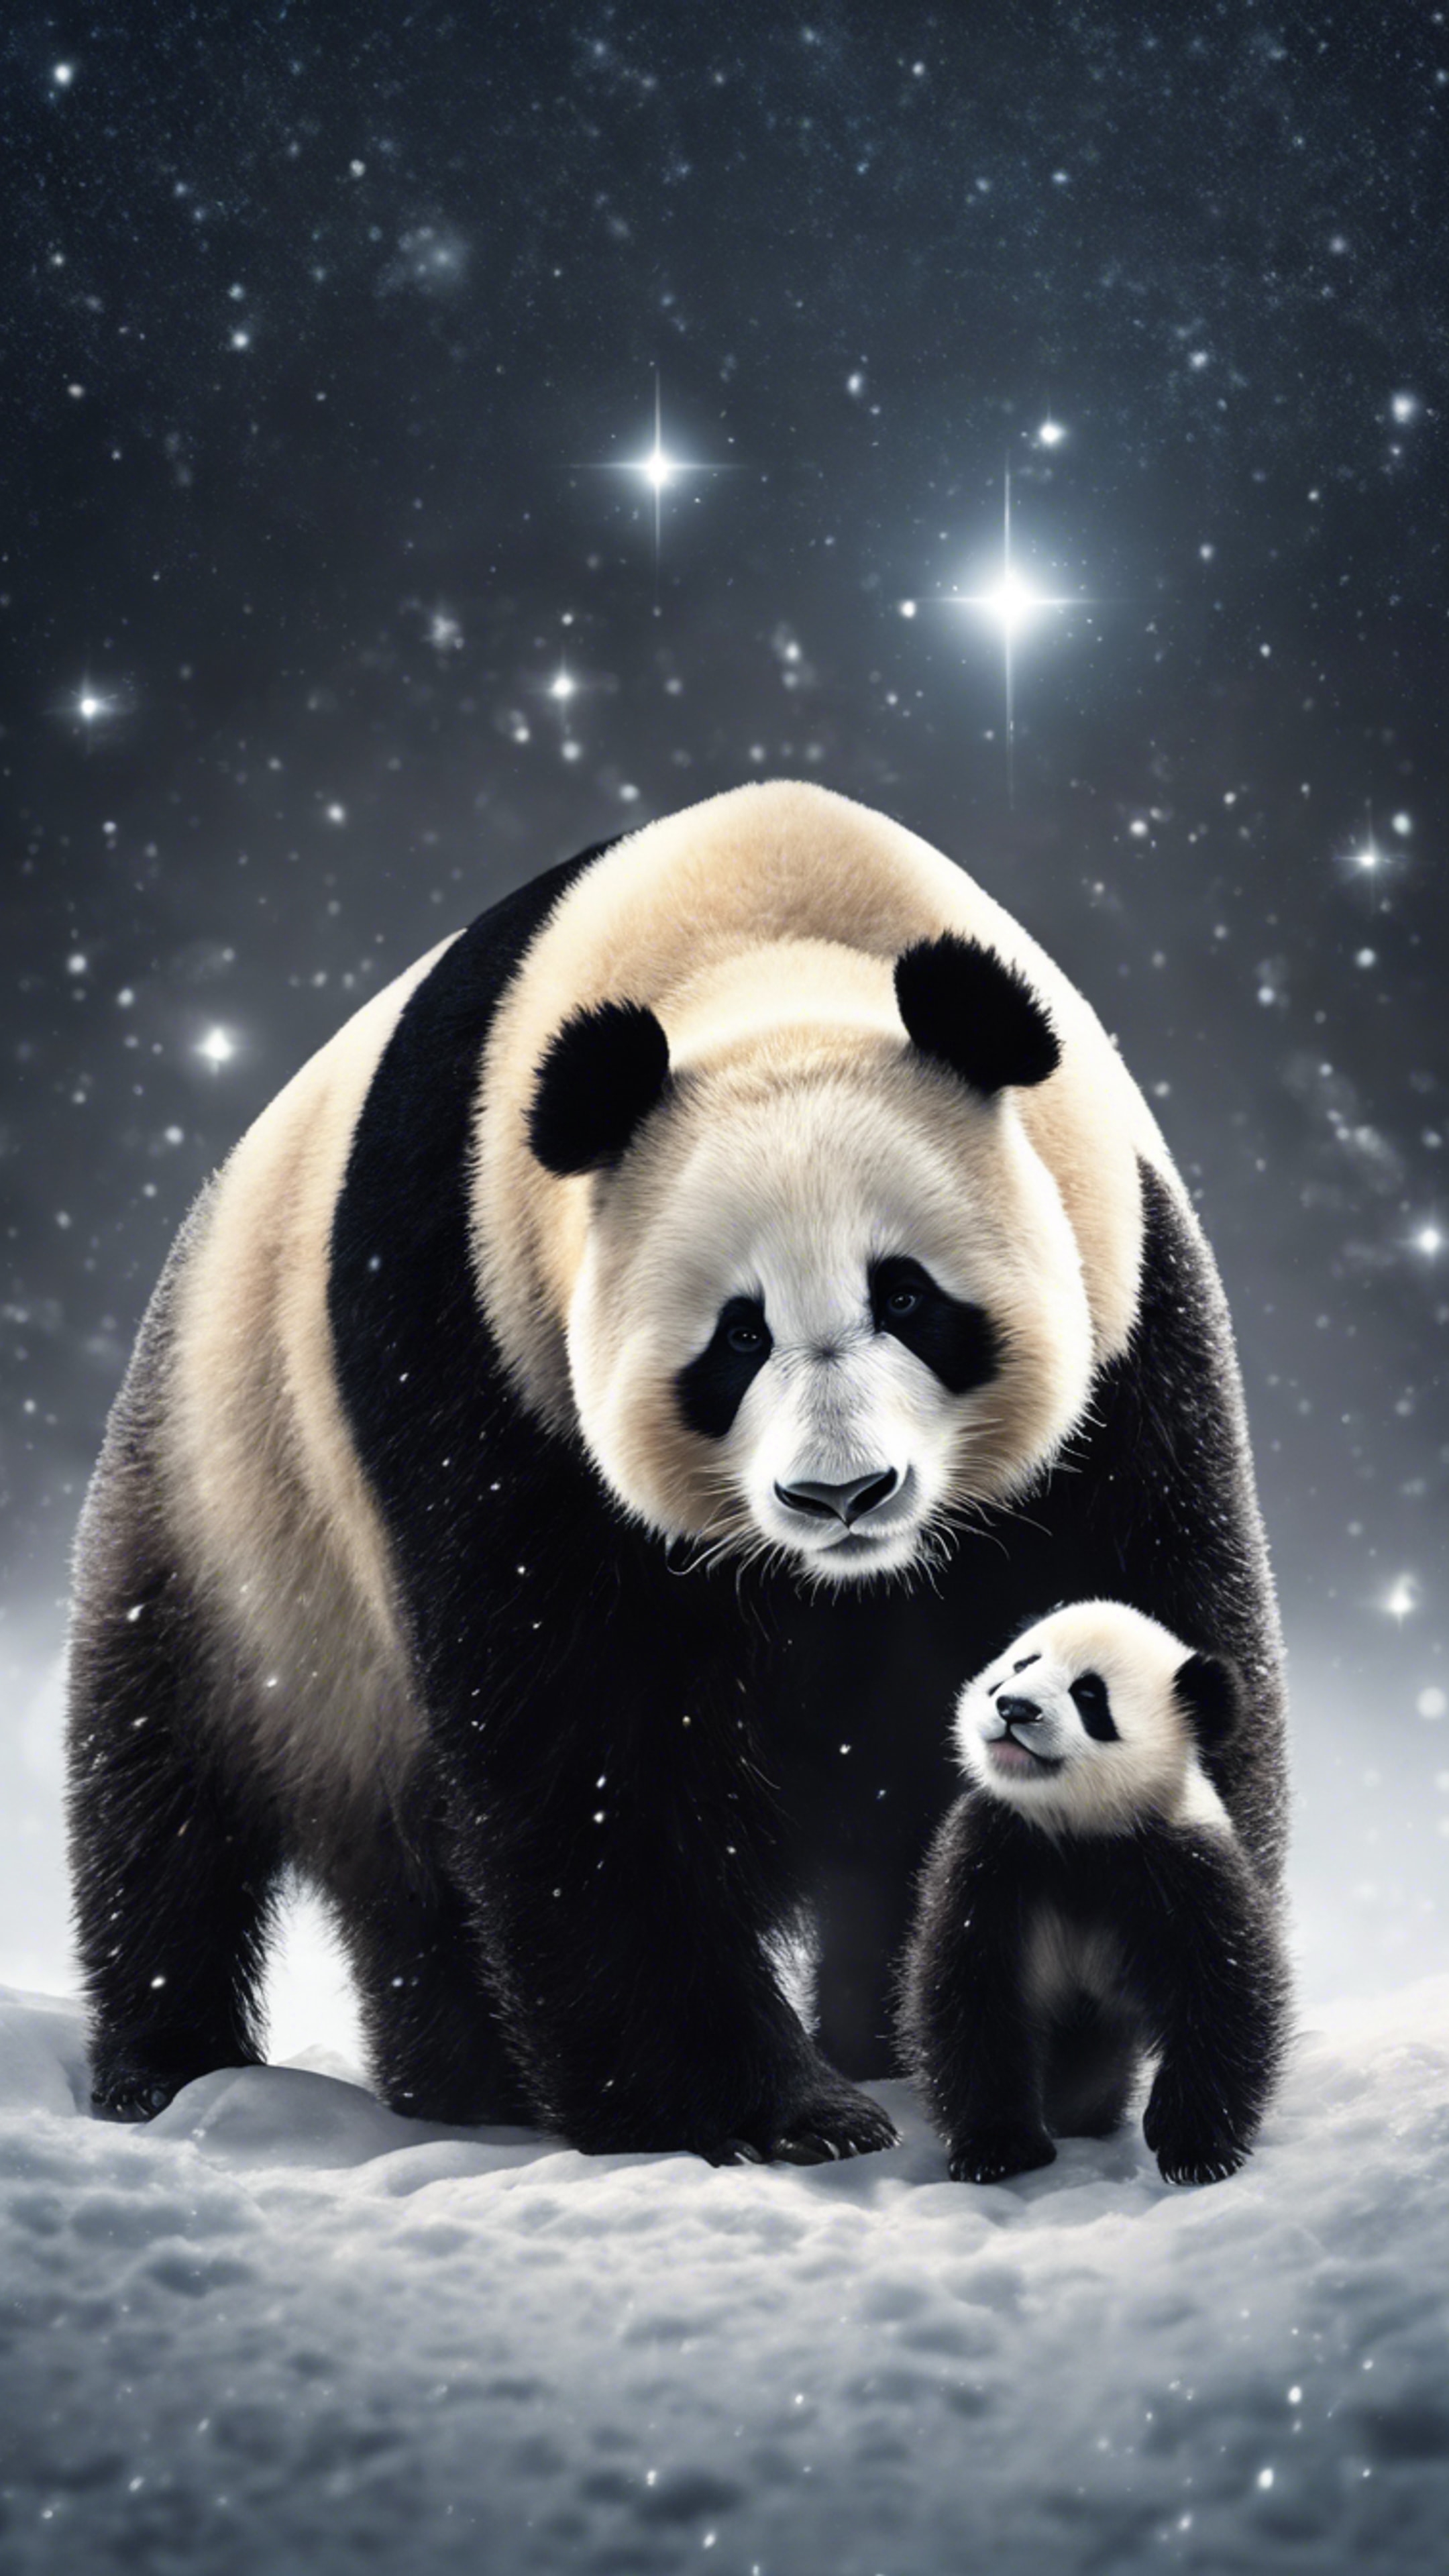 A mother panda with her cubs, peacefully taking a stroll on a silent, snowy night under a blanket of stars. Ფონი[875b5ef660eb48ddb691]